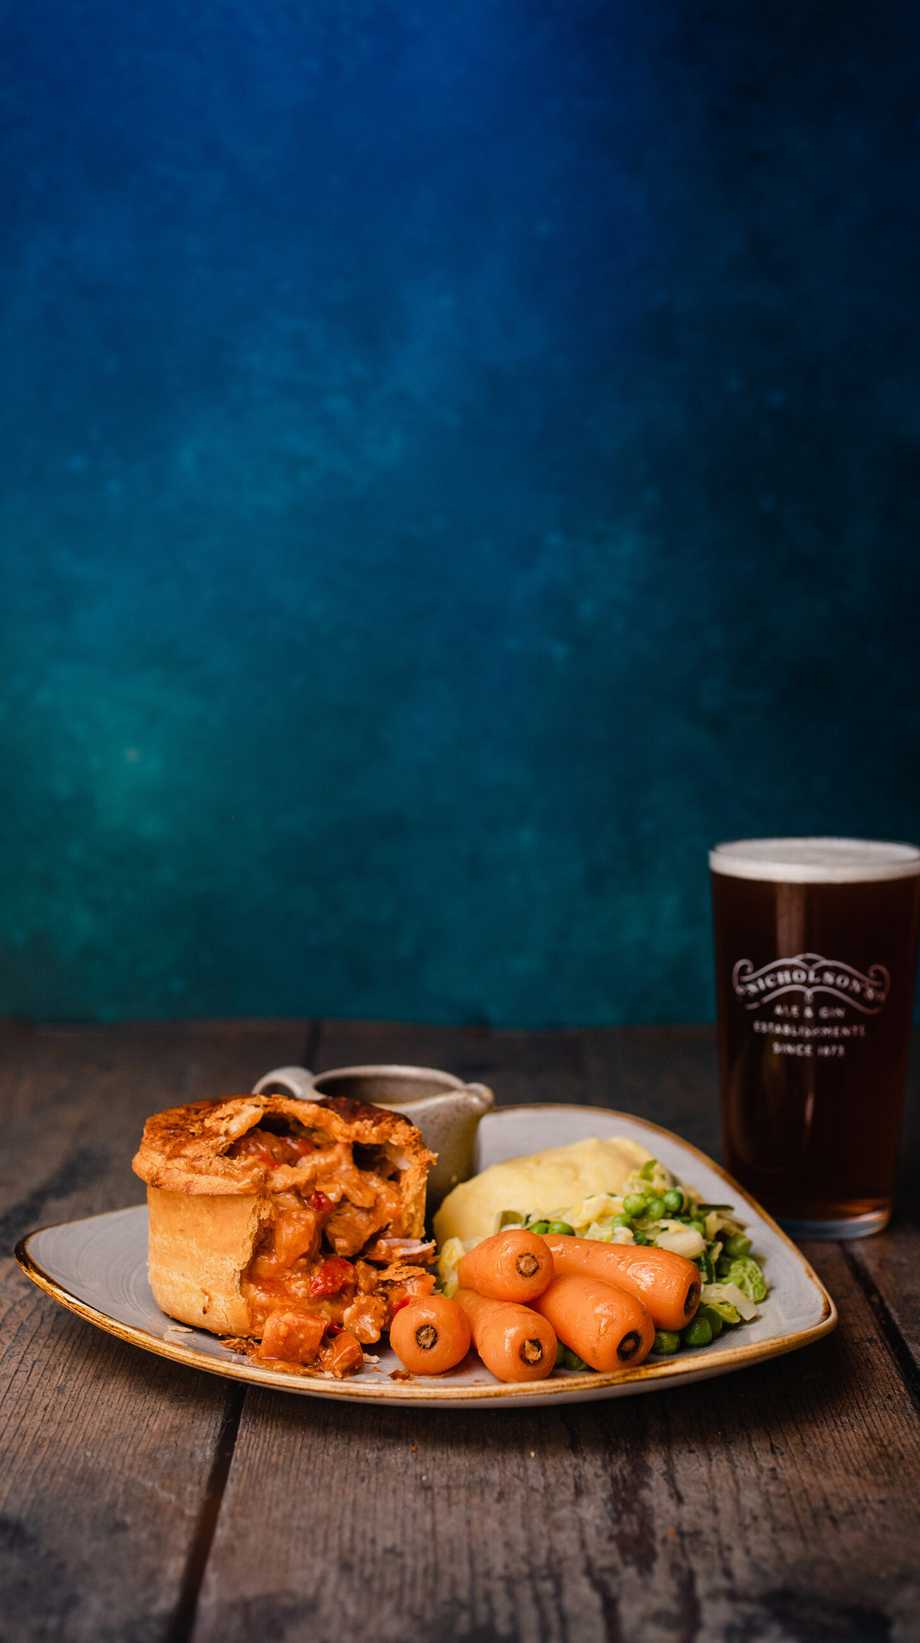 A plate sits against a blue background. On it, there's a pie, mash, vegetables, and gravy. Behind it, a pint of Nicholson's ale.